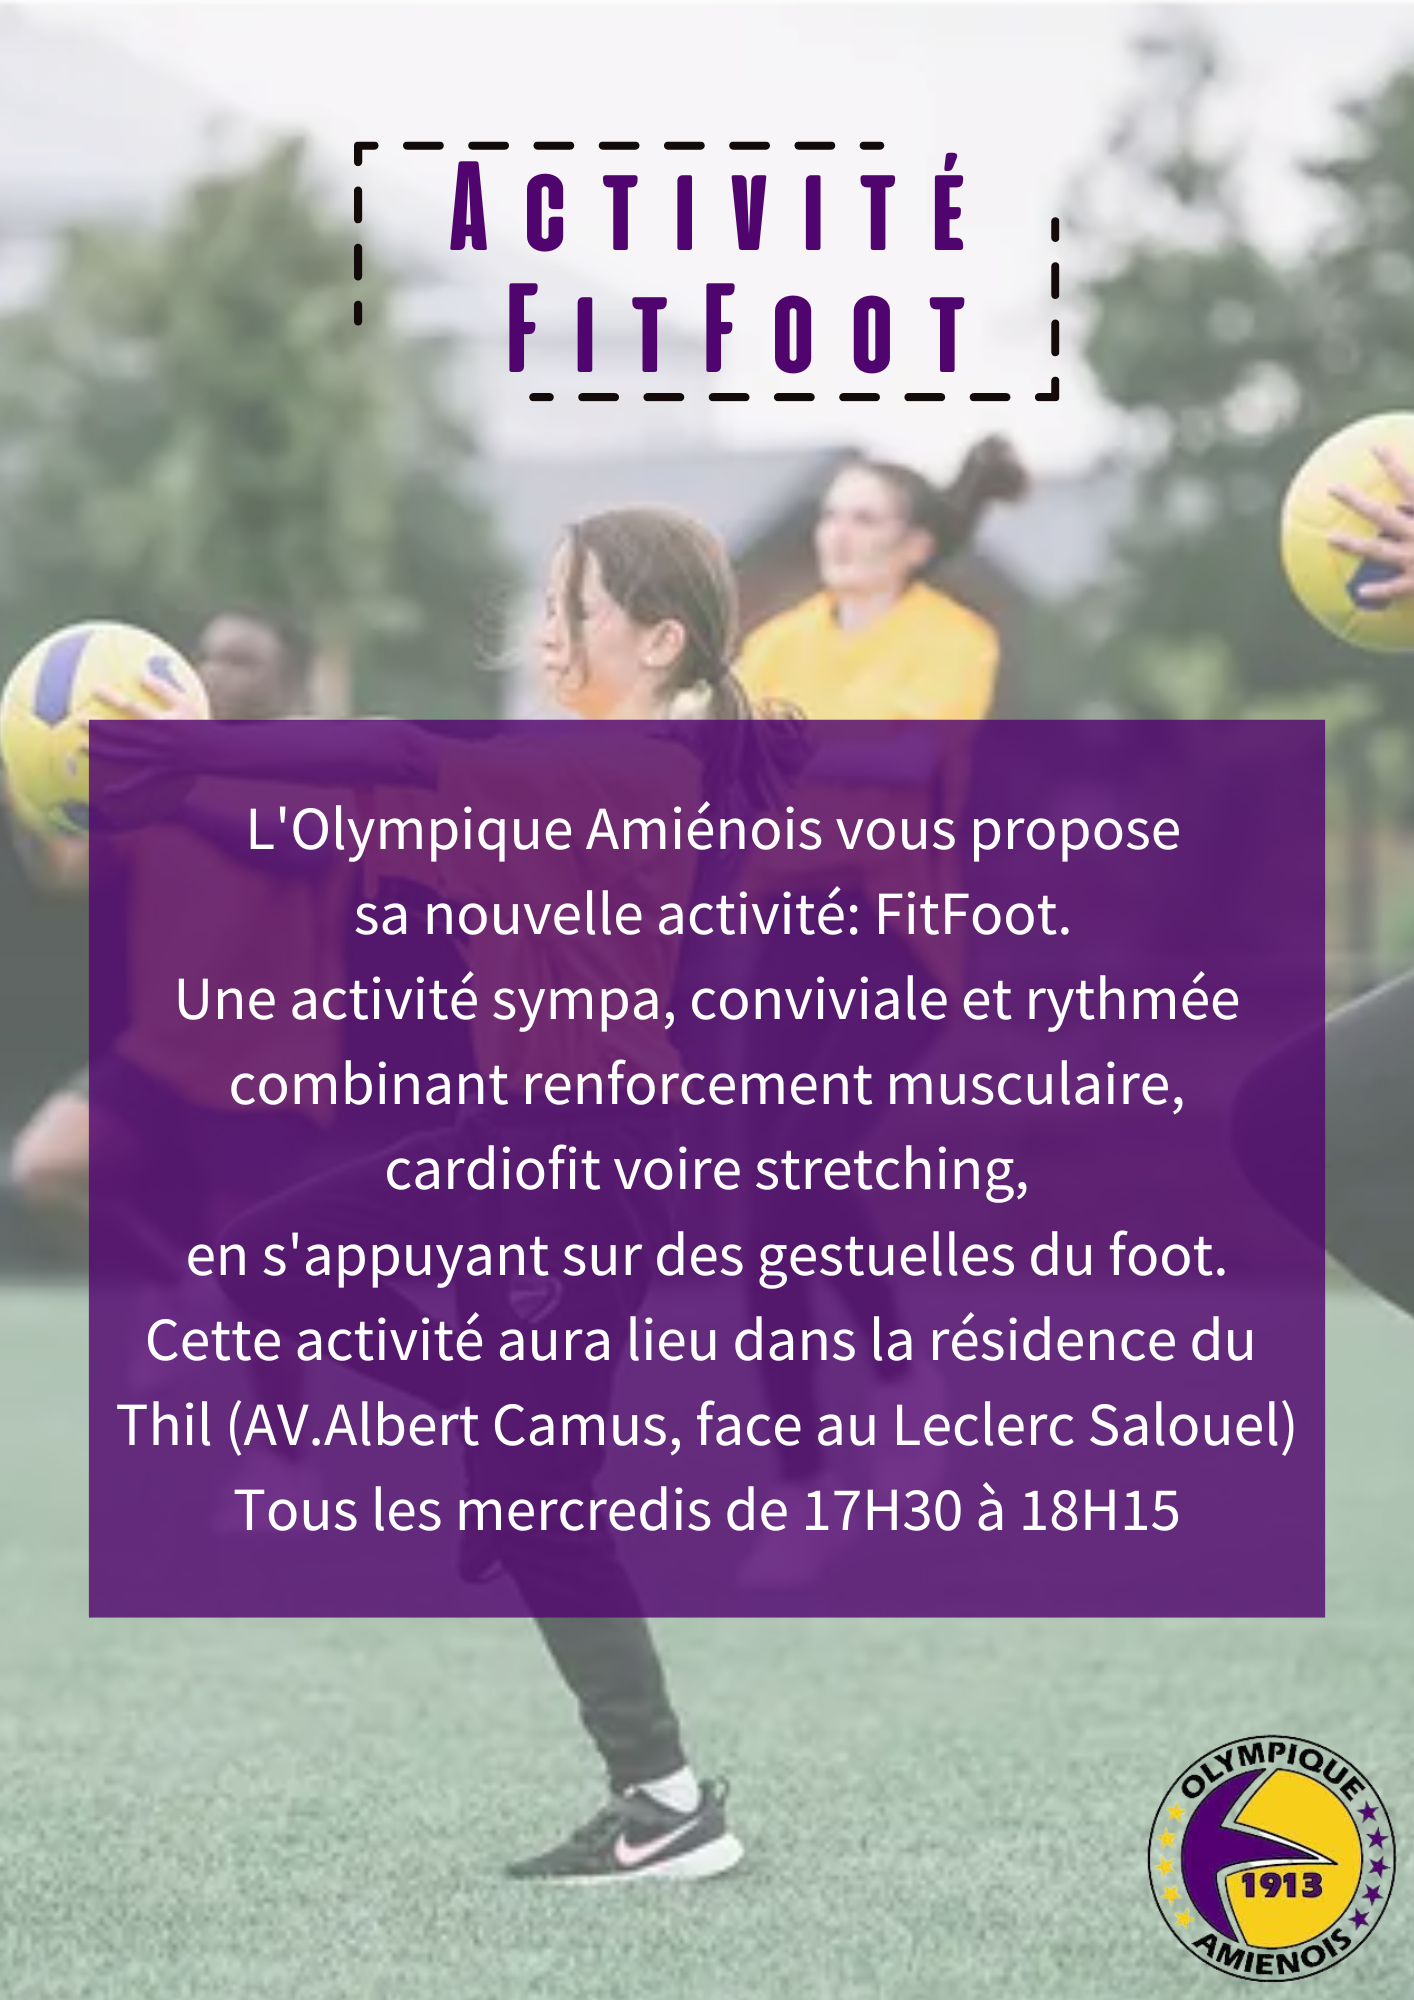 Activite FitFoot 2